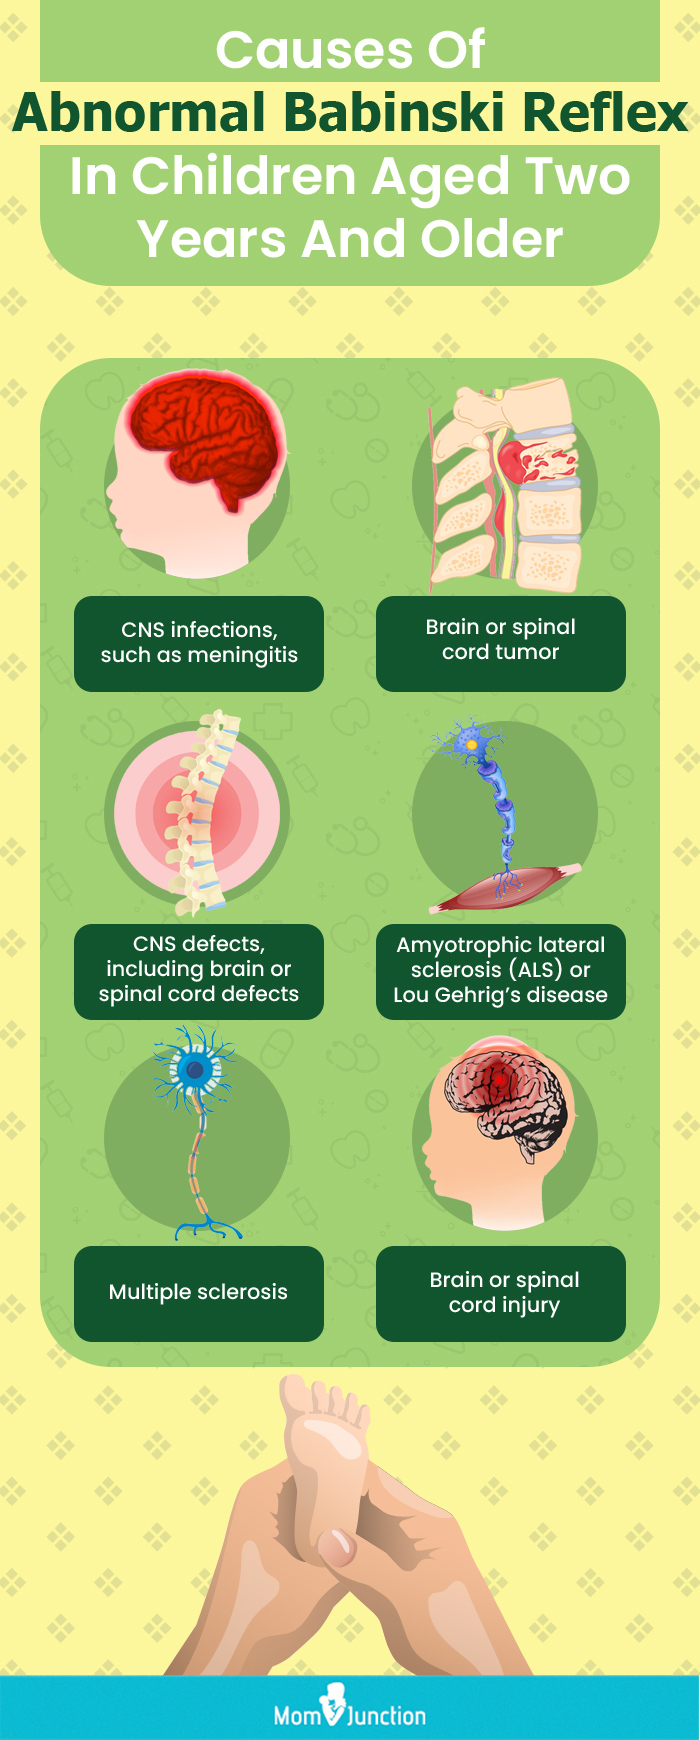 causes of abnormal babinski reflex in children aged two years and older (infographic)